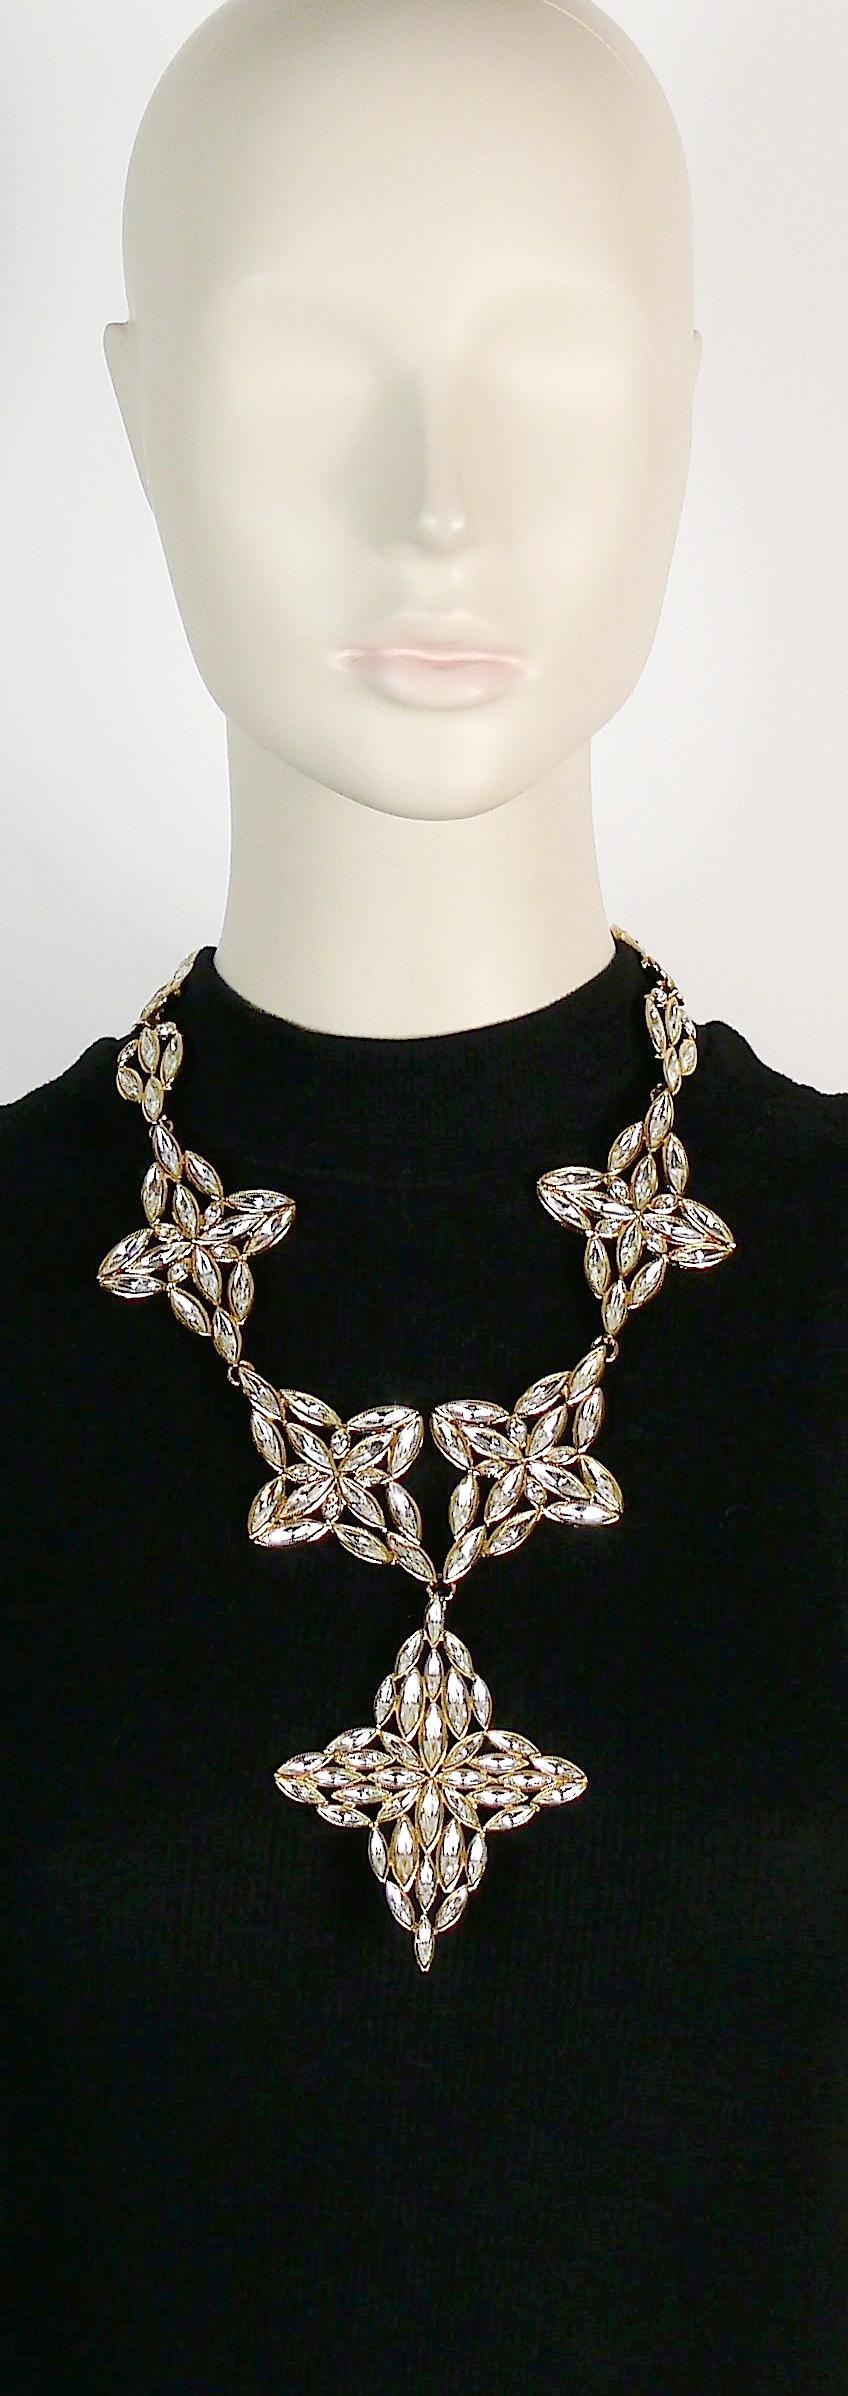 YVES SAINT LAURENT vintage gold toned statement necklace featuring stylized flowers embellished with clear crystals.

Lobster clasp closure.
Adjustable length.

Embossed YSL Made in France.

Indicative measurements : adjustable length from approx.